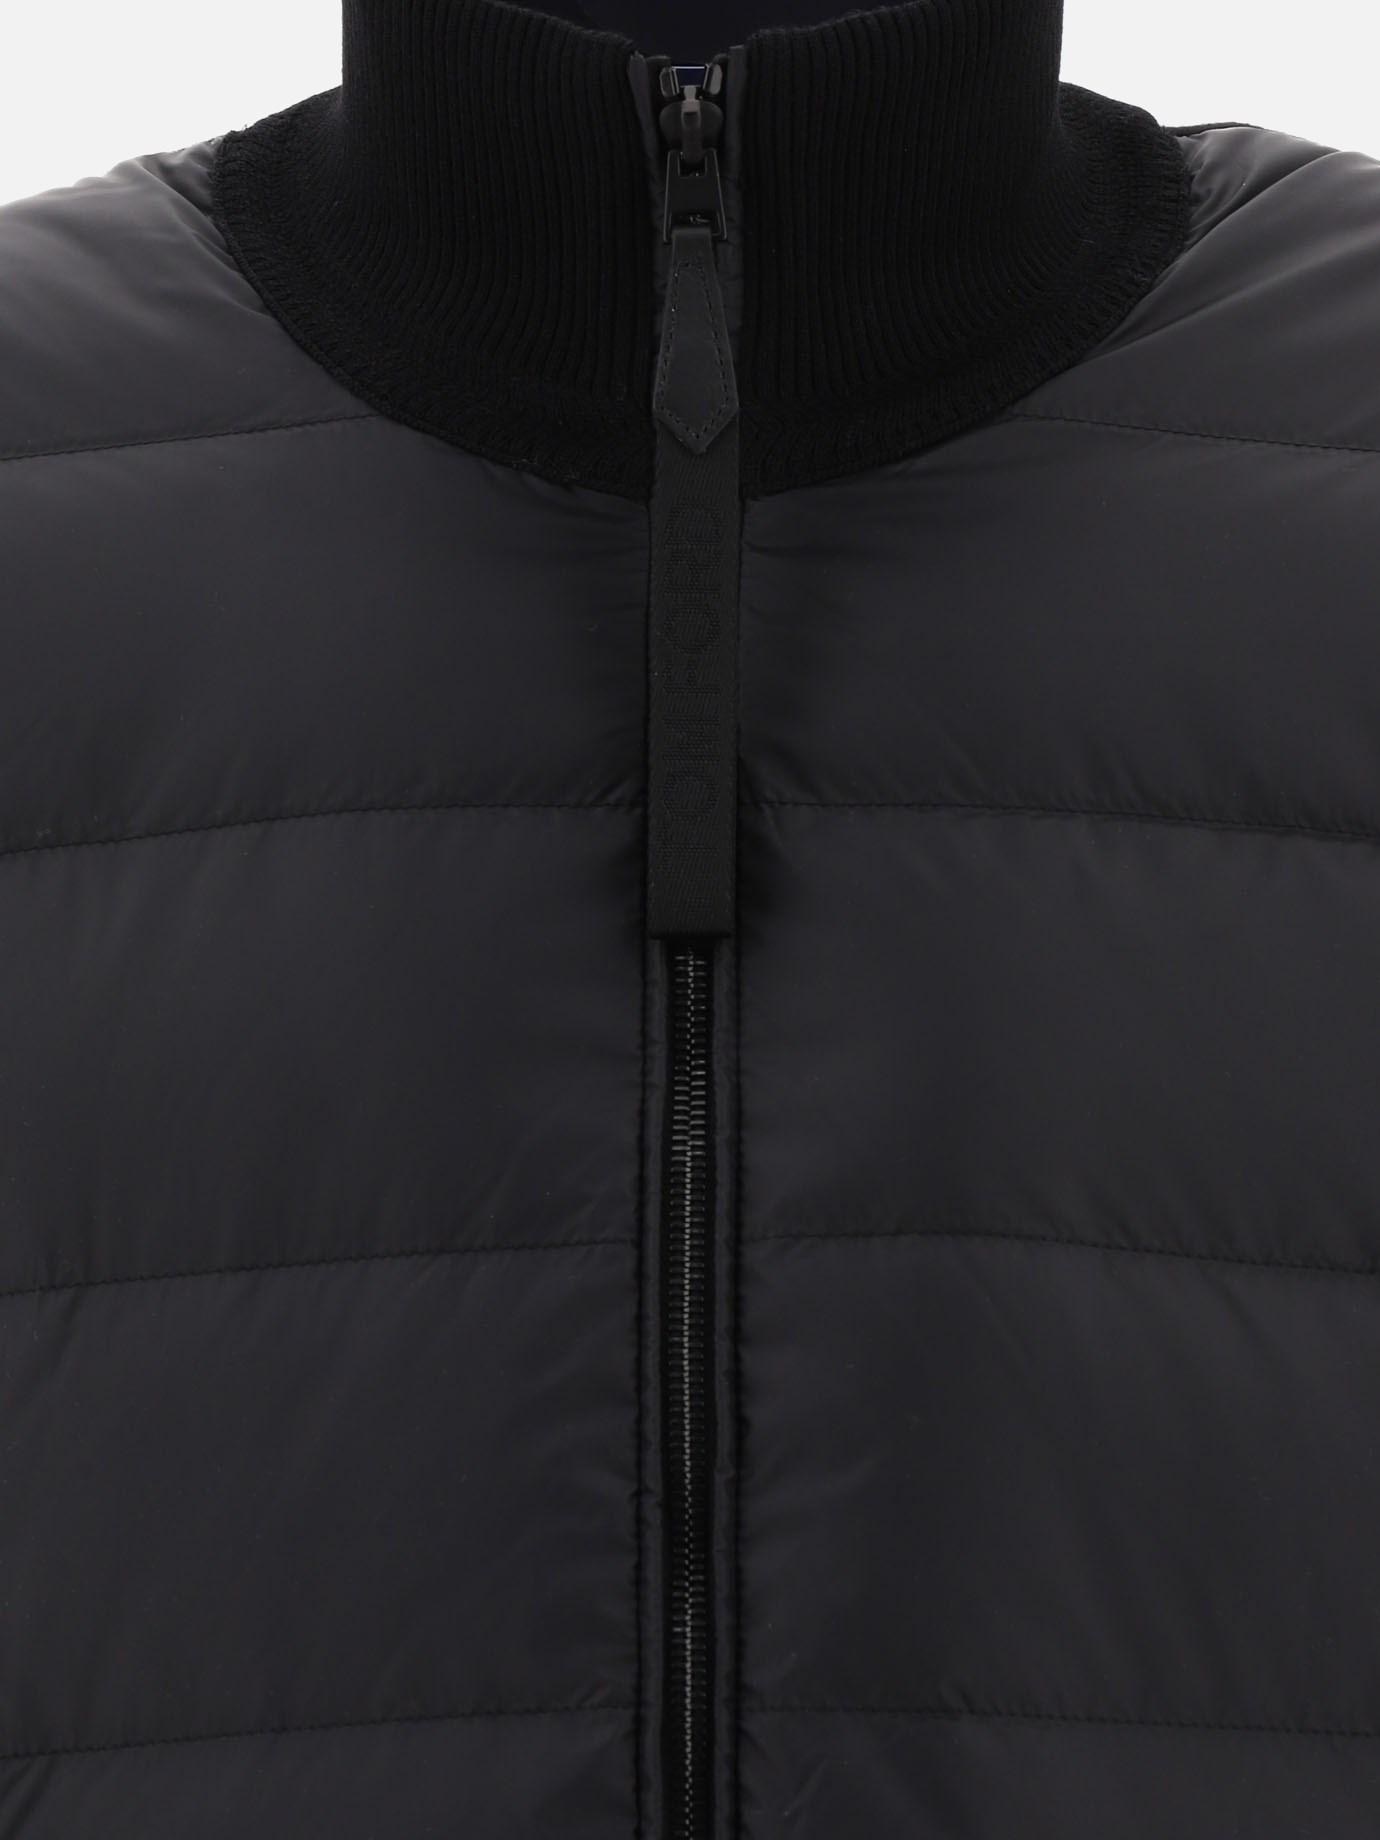 Tricot down jacket by Tom Ford